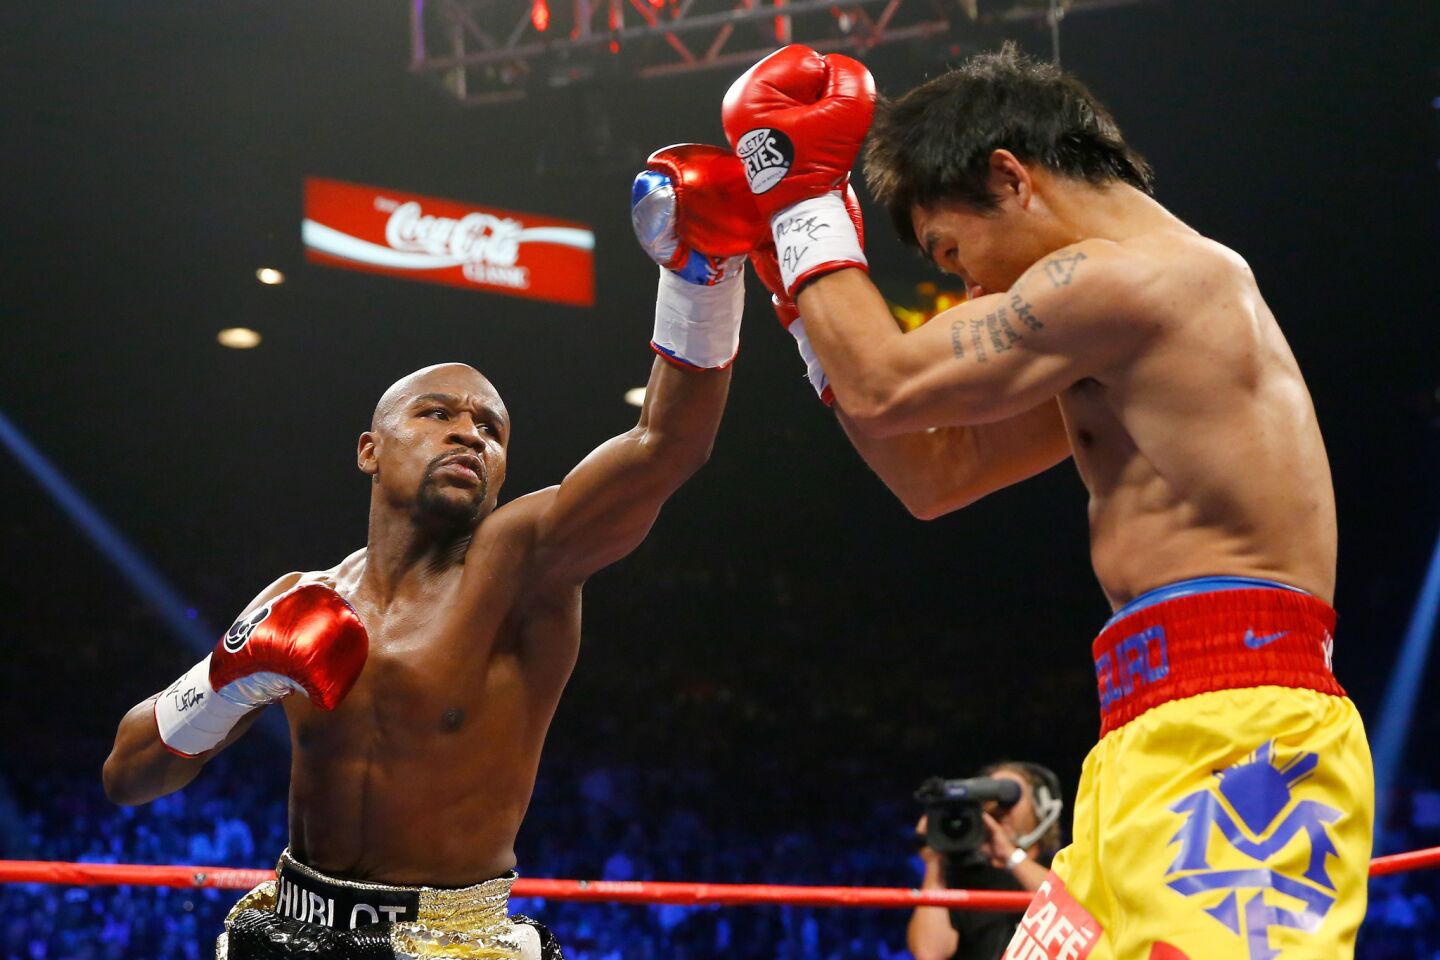 Floyd Mayweather Jr. throws a punch in the first round.